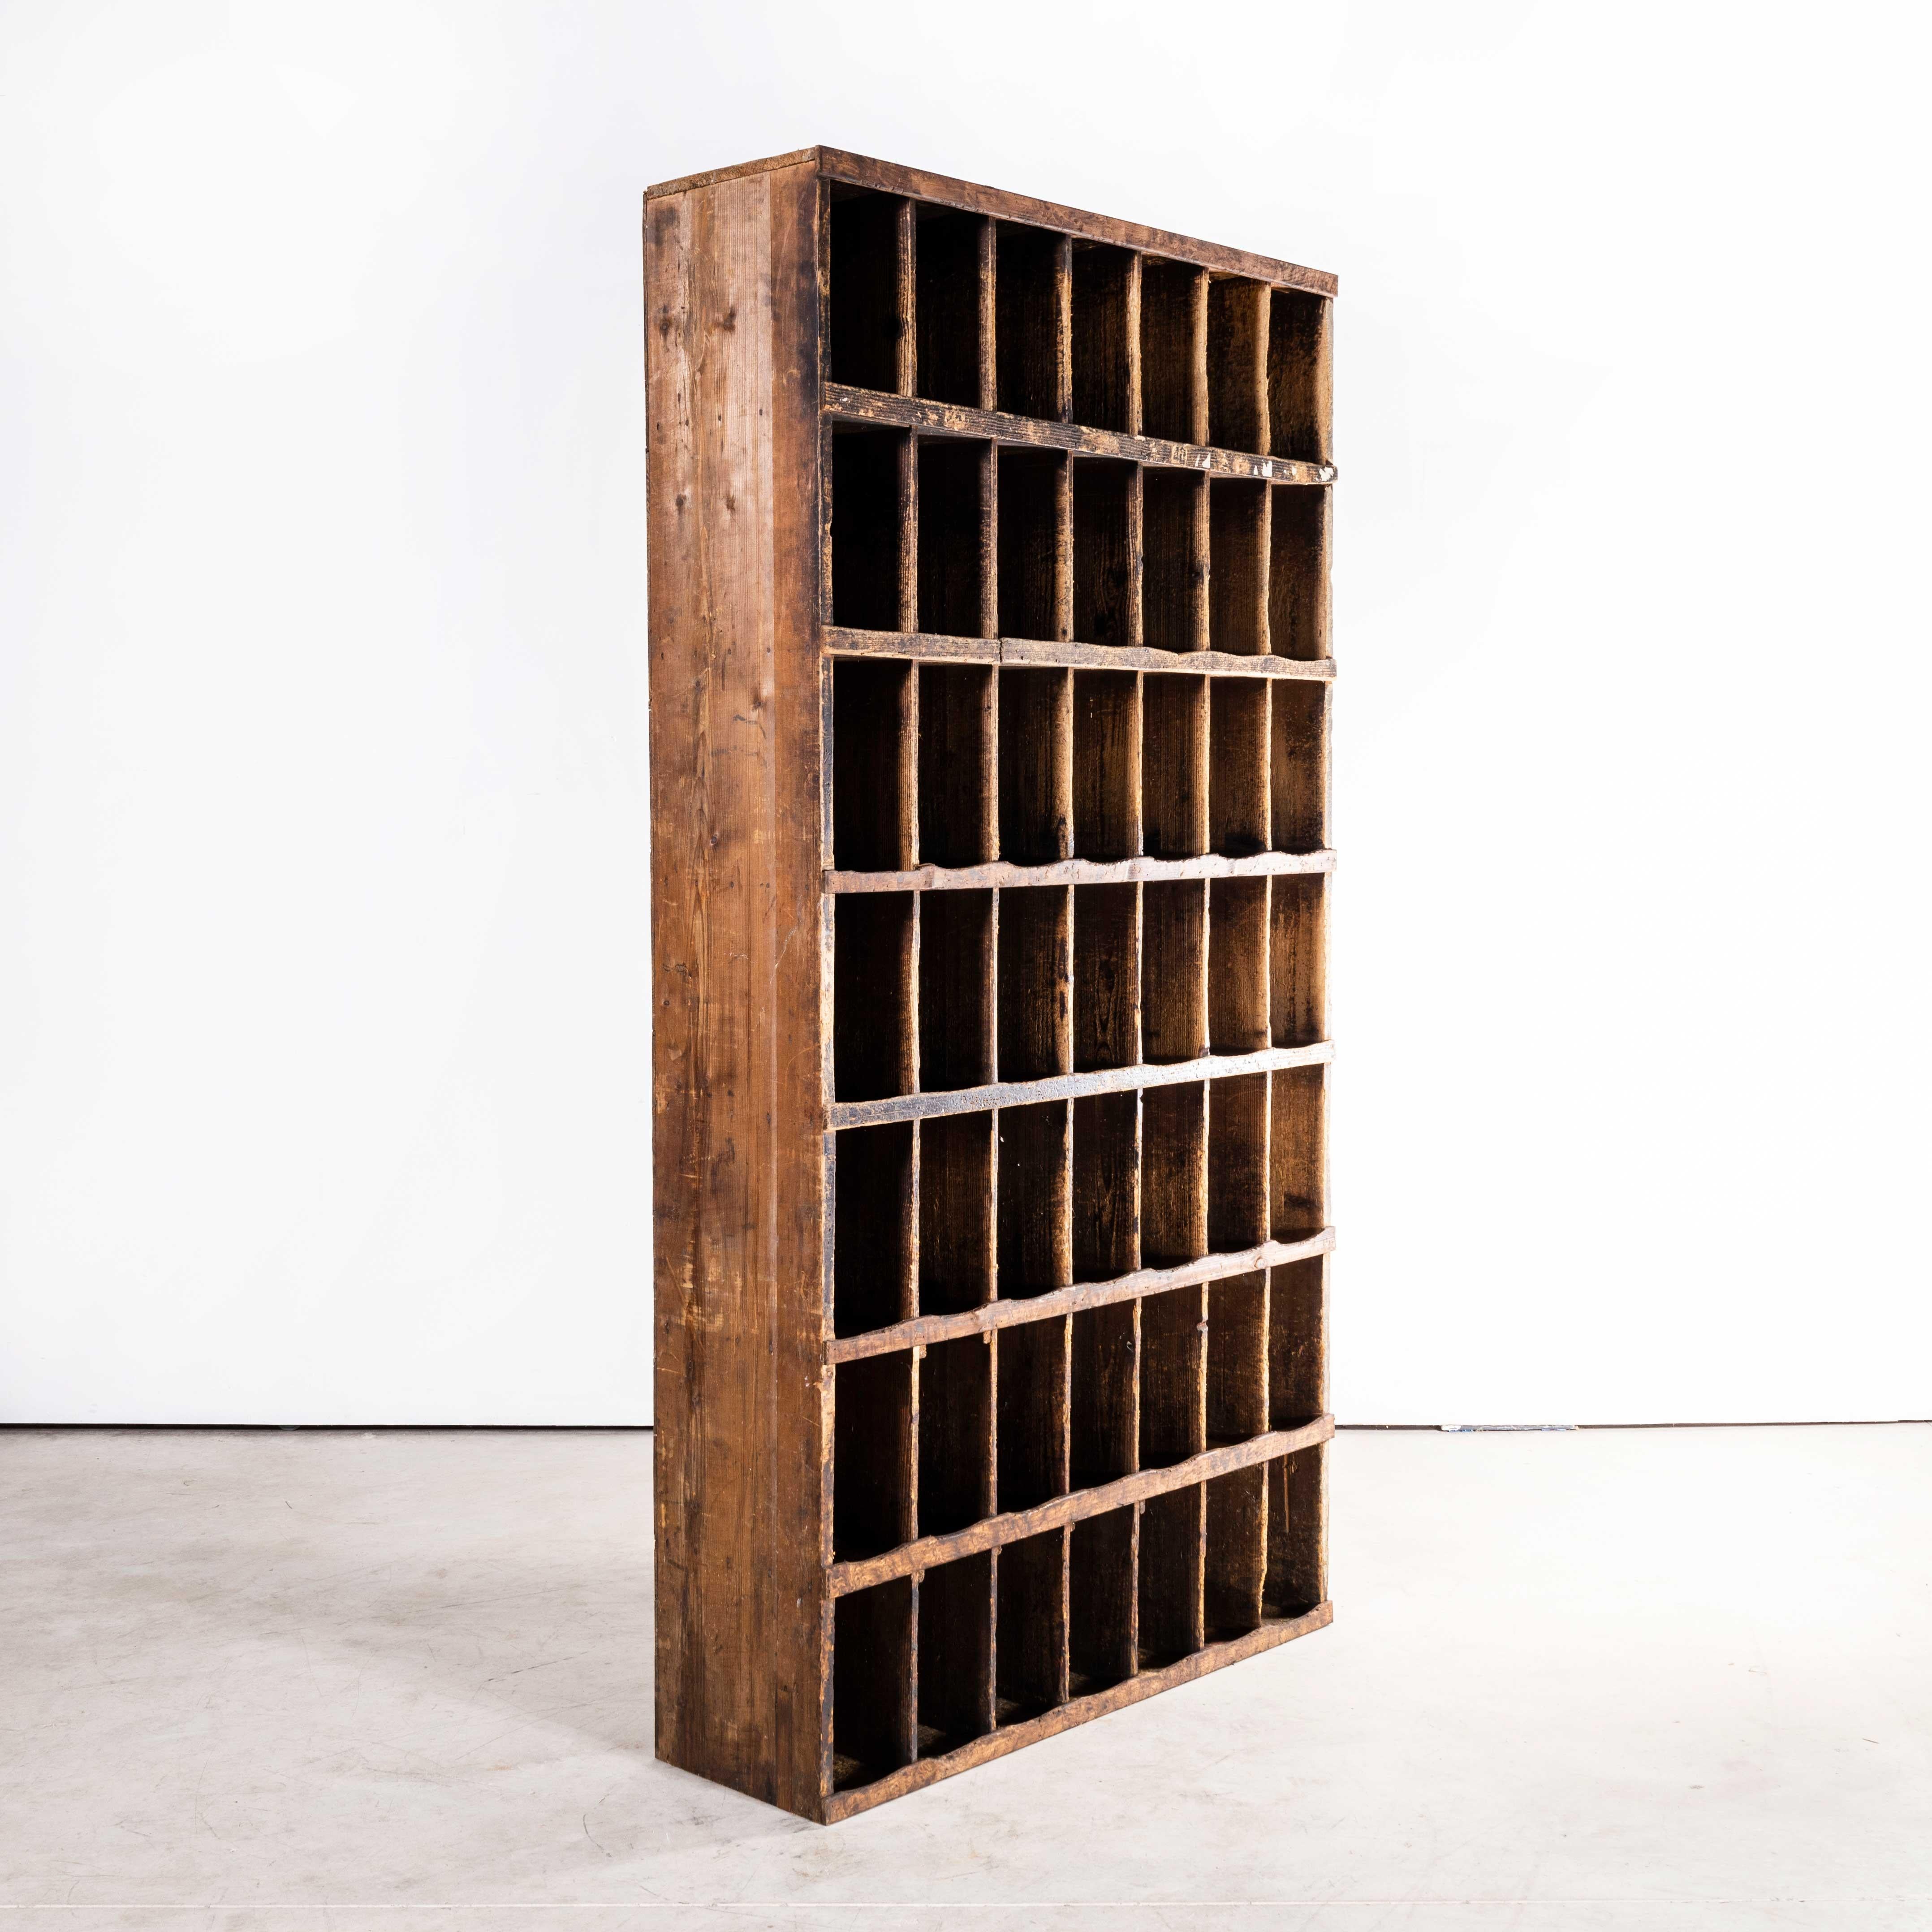 1950s Tall French pigeon hole unit
1950s Tall French pigeon hole unit. Original French Pigeon hole shelving unit with 49 pigeon holes. Made from solid pitch pine. Sourced from a shoe factory in south west of France, the pigeon holes were used to